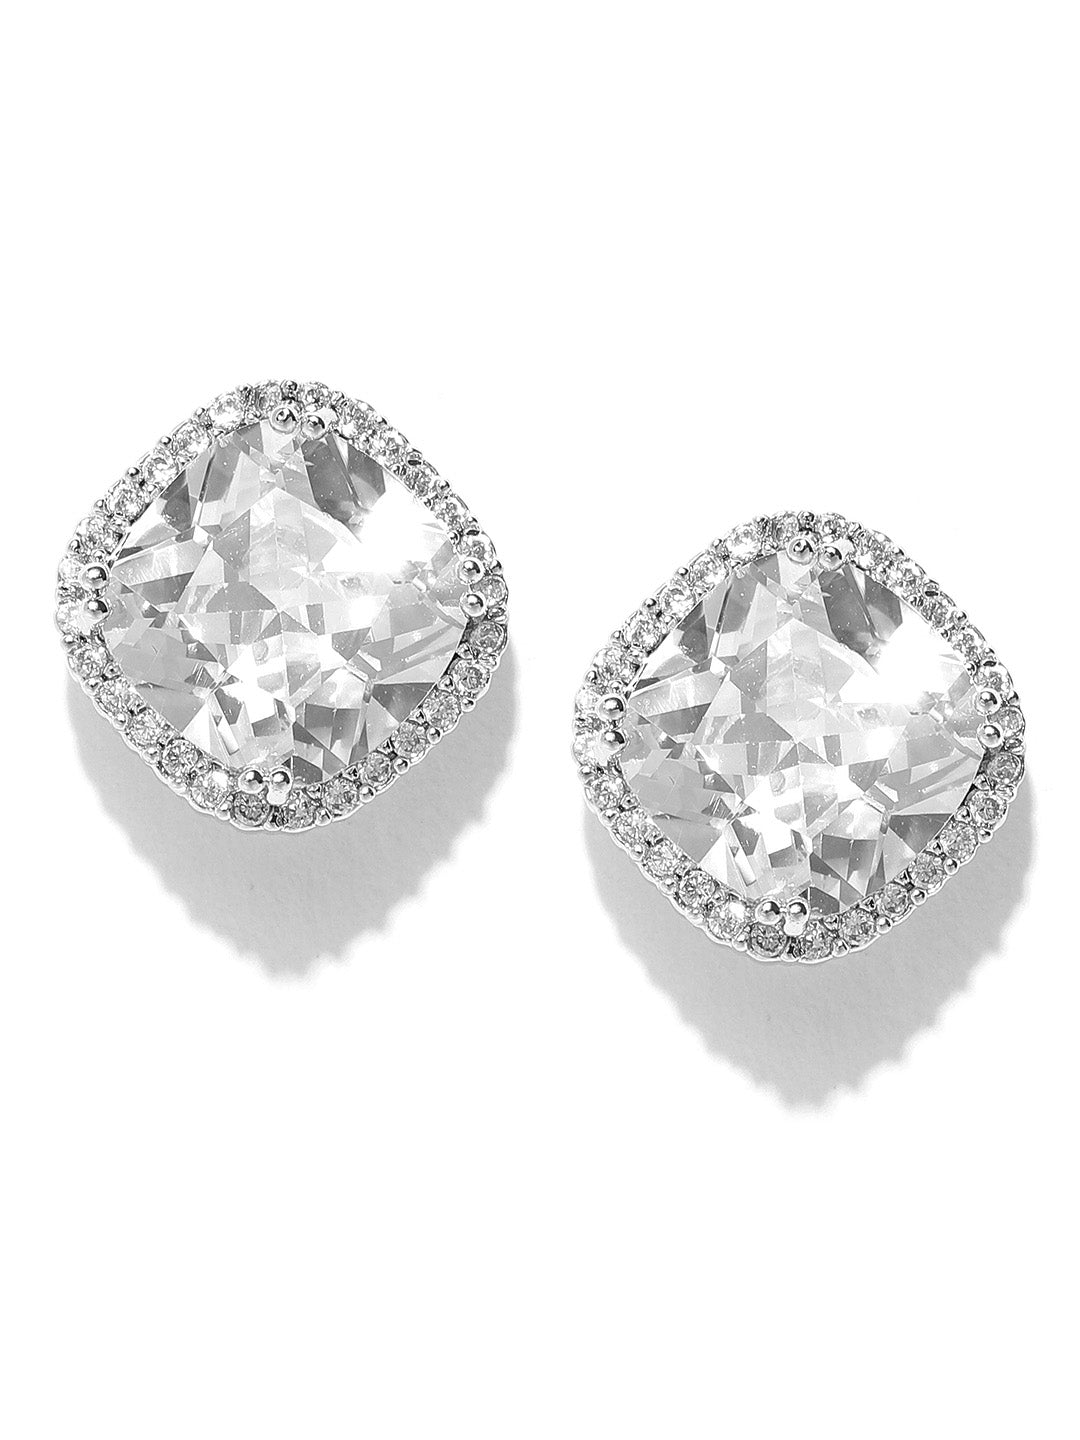 Silver-Plated American Diamond Solitaire Stud Earrings